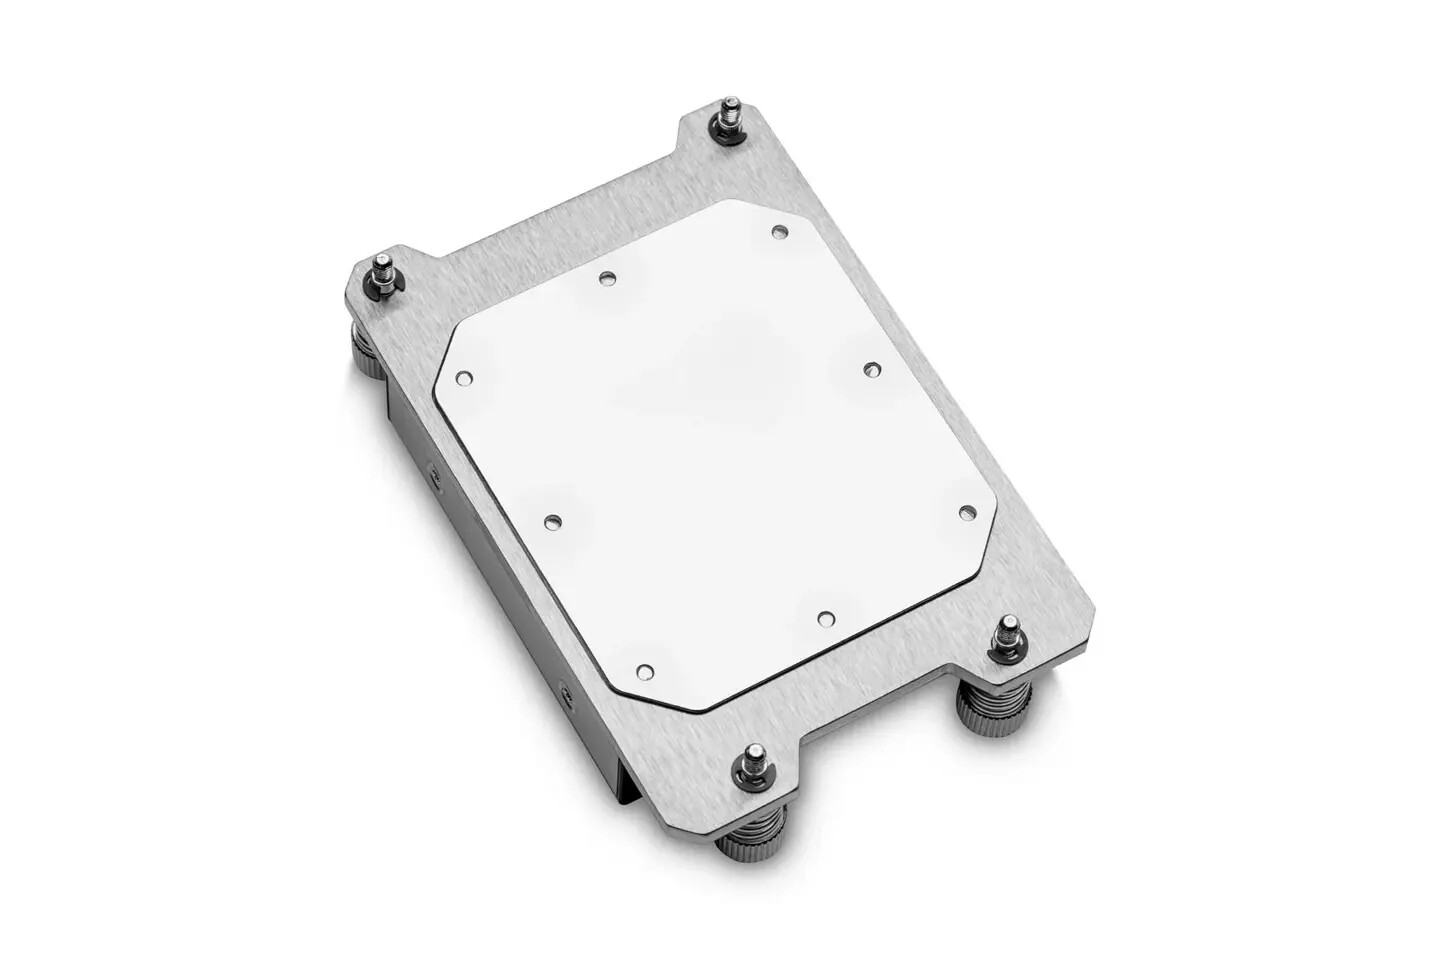 EK introduces Water Block for Threadripper and EPYC CPUs, Perfect for Workstations